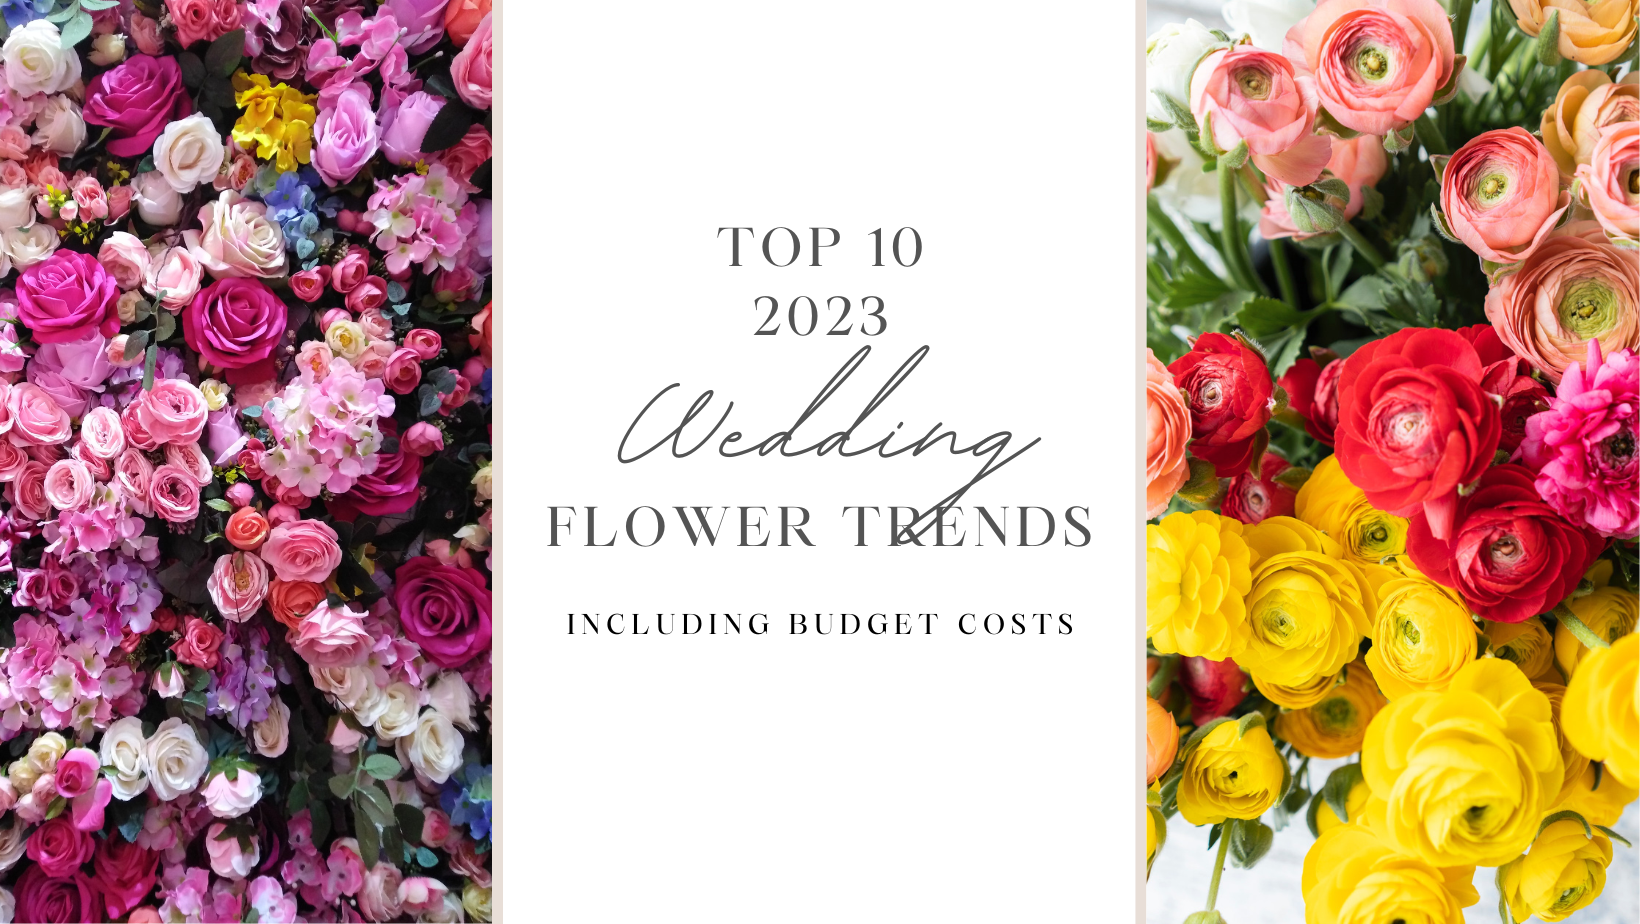 2023 Wedding Flower Trends [Including Budget Costs]-Koyal Wholesale